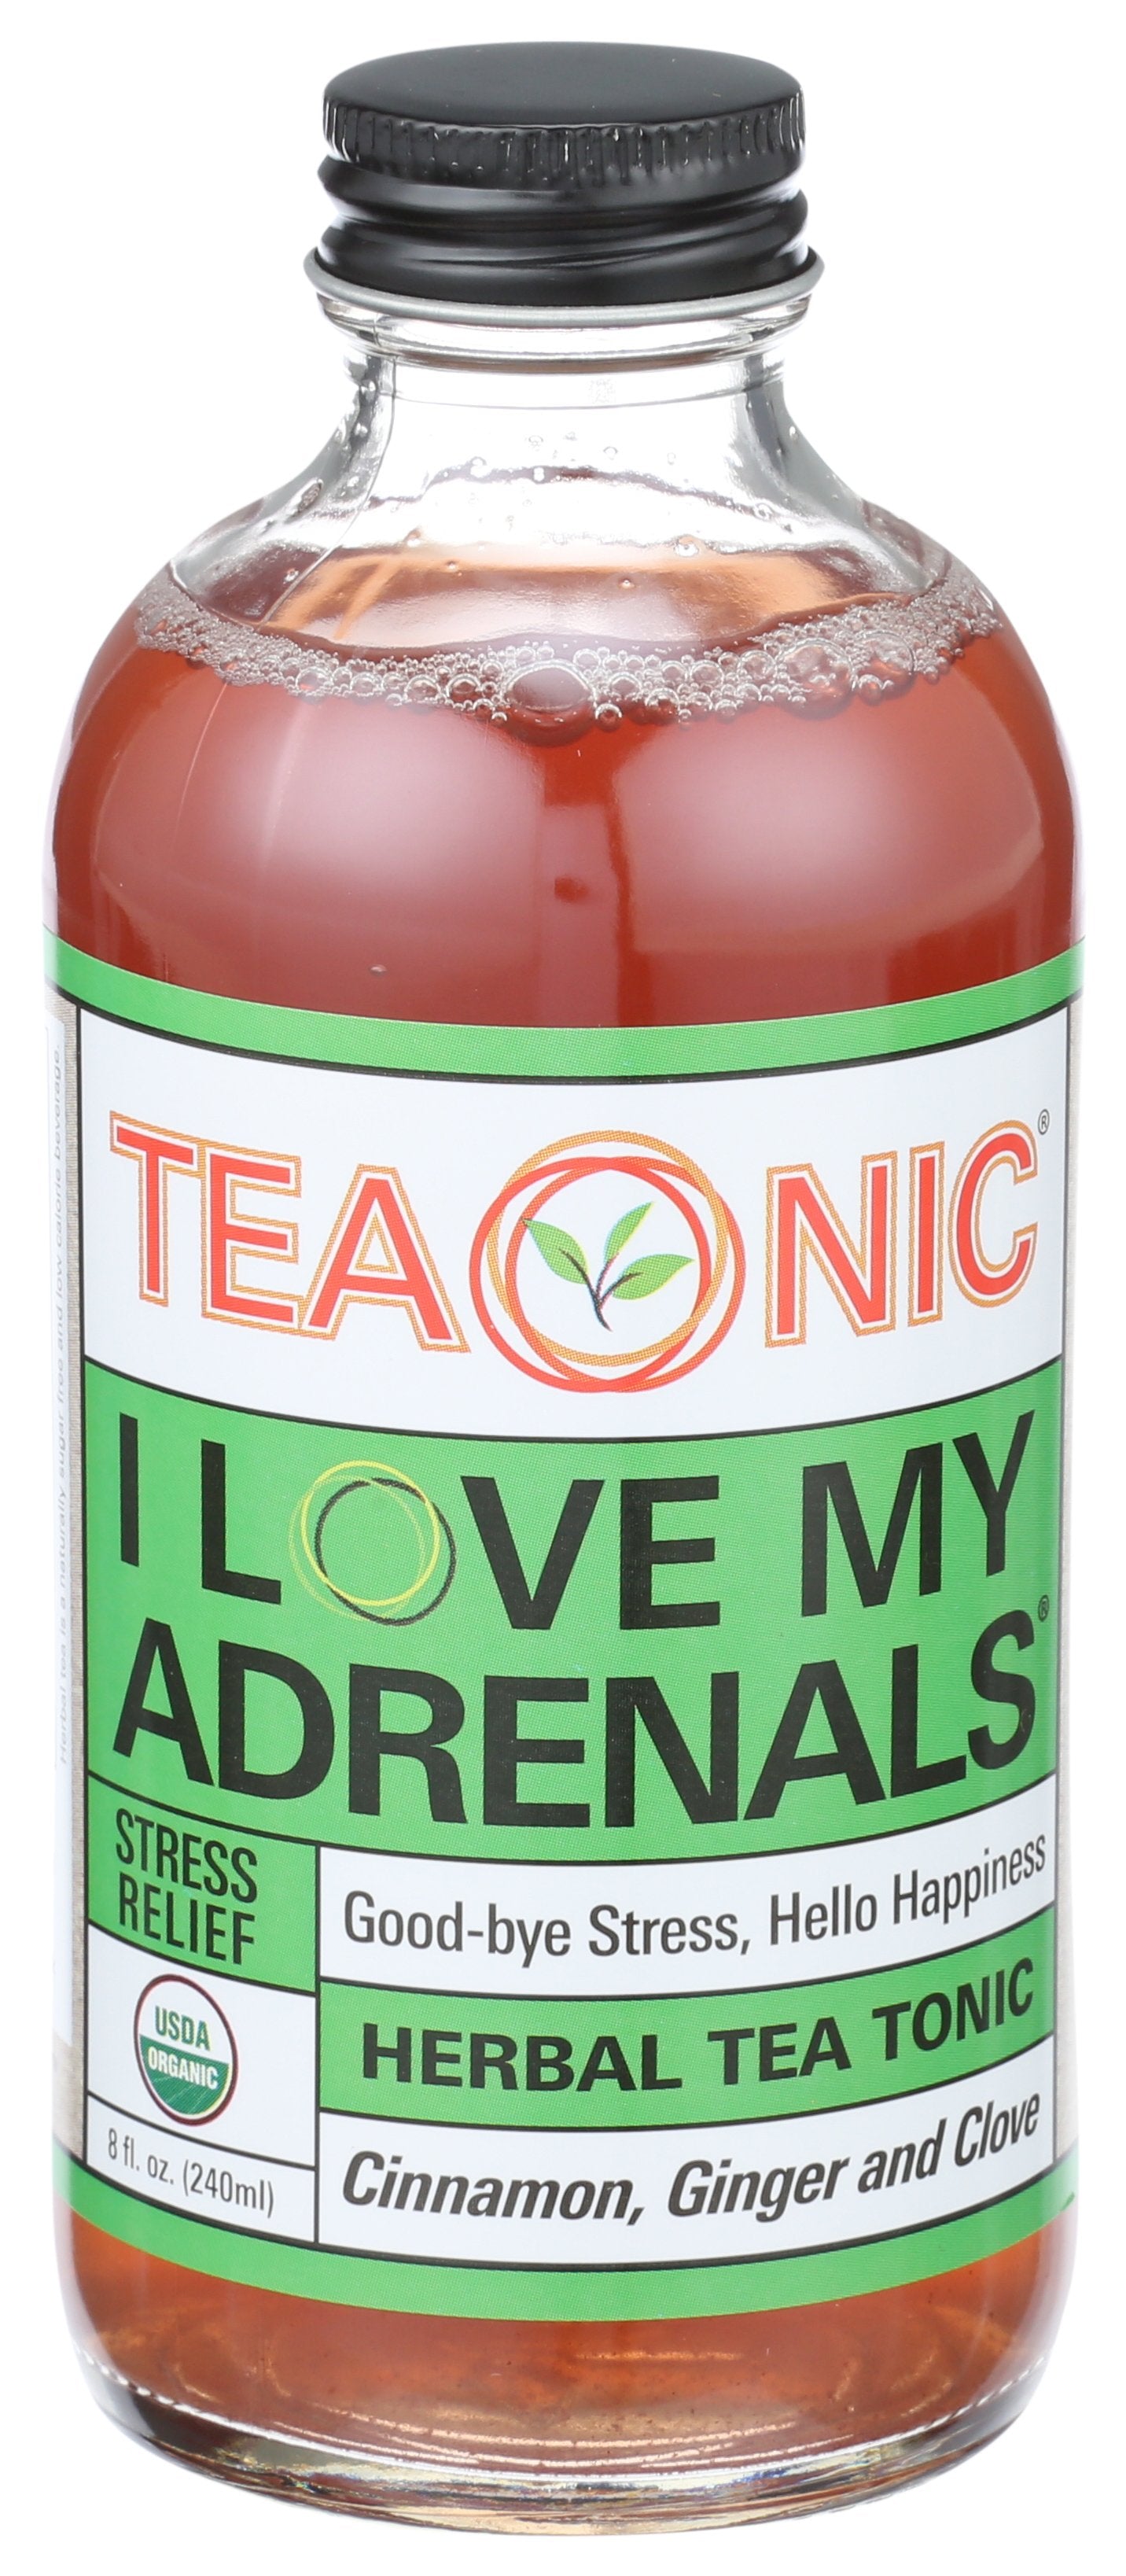 TEAONIC TEA HERBL LOVE ADRENALS - Case of 6